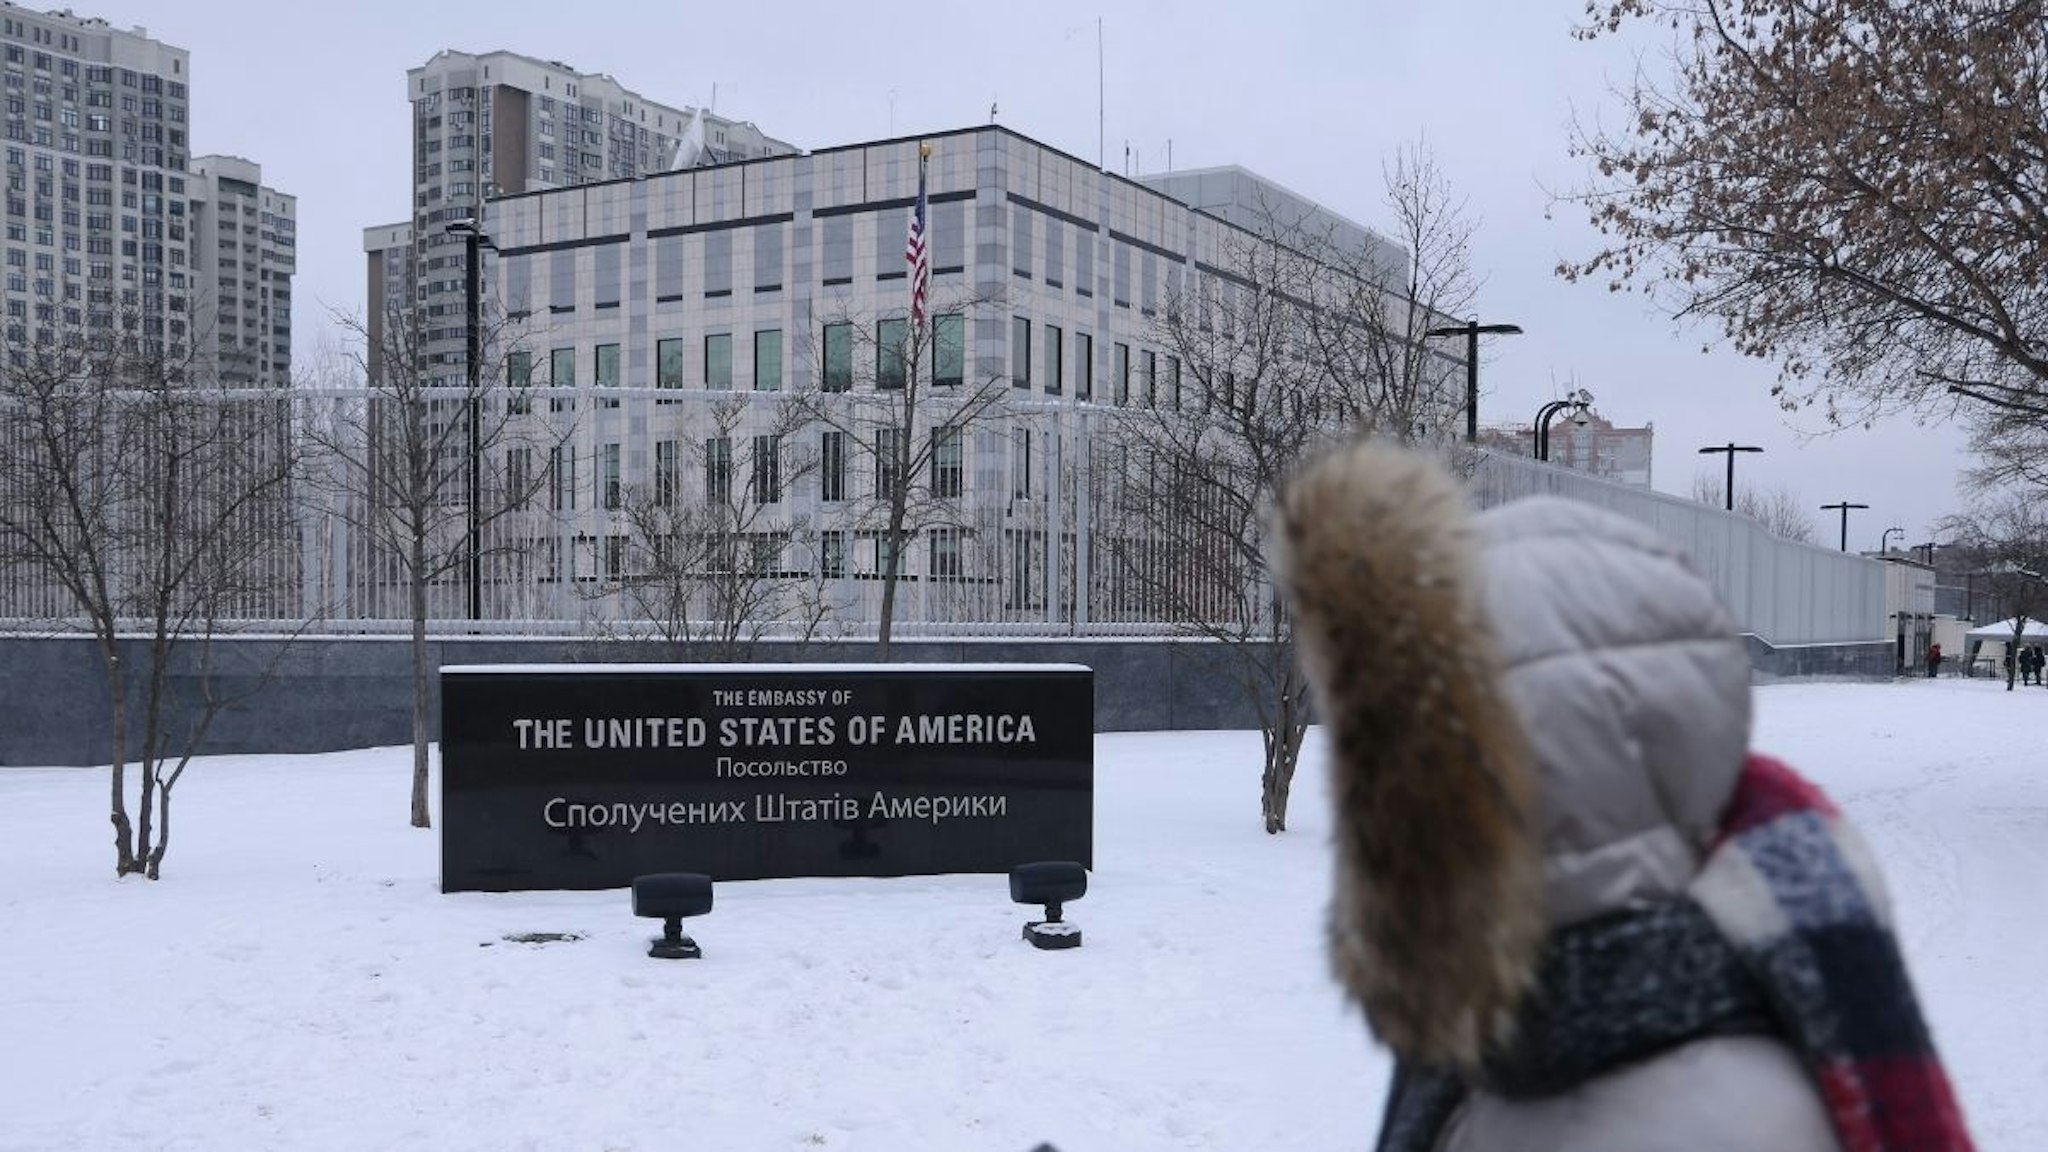 A view of the U.S. Embassy on January 24, 2022 in Kyiv, Ukraine. According to media reports the embassy has ordered family members of embassy staff to leave the country and has also urged U.S. citizens in Ukraine to leave as well.